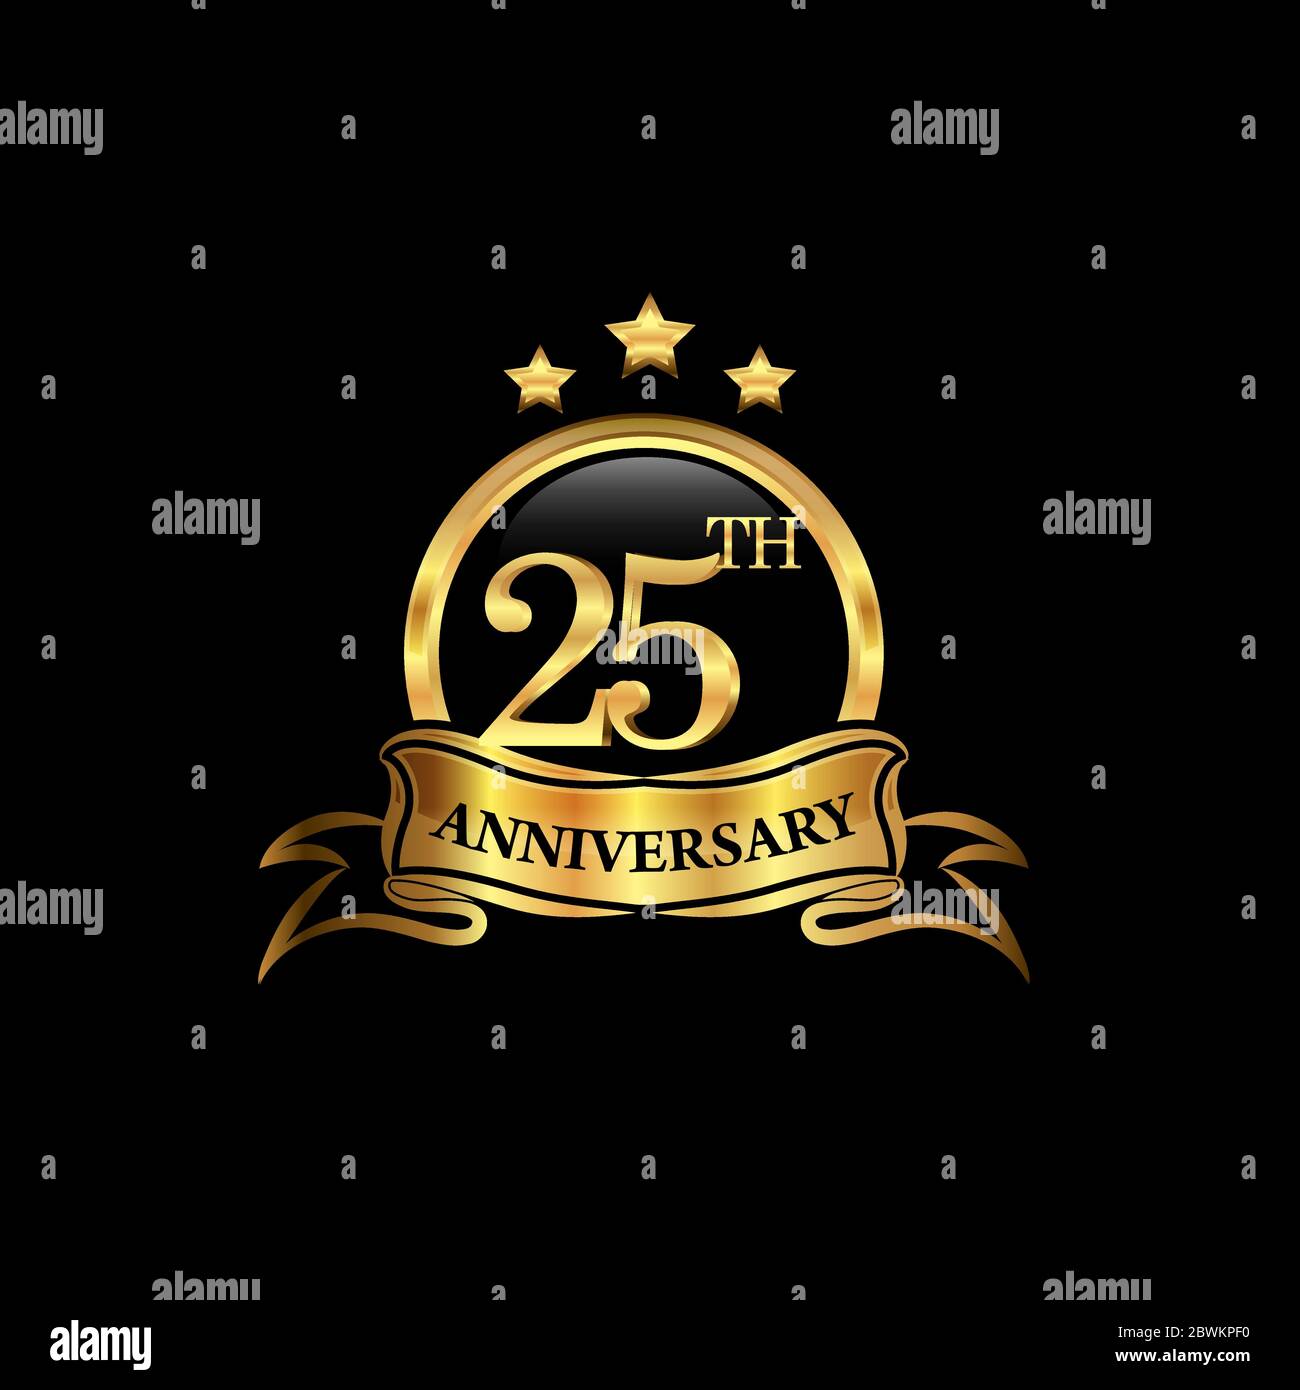 25th Anniversary Design Logotype Golden Color With Ring And Gold Ribbon For Anniversary Celebration Eps10 Stock Vector Image Art Alamy